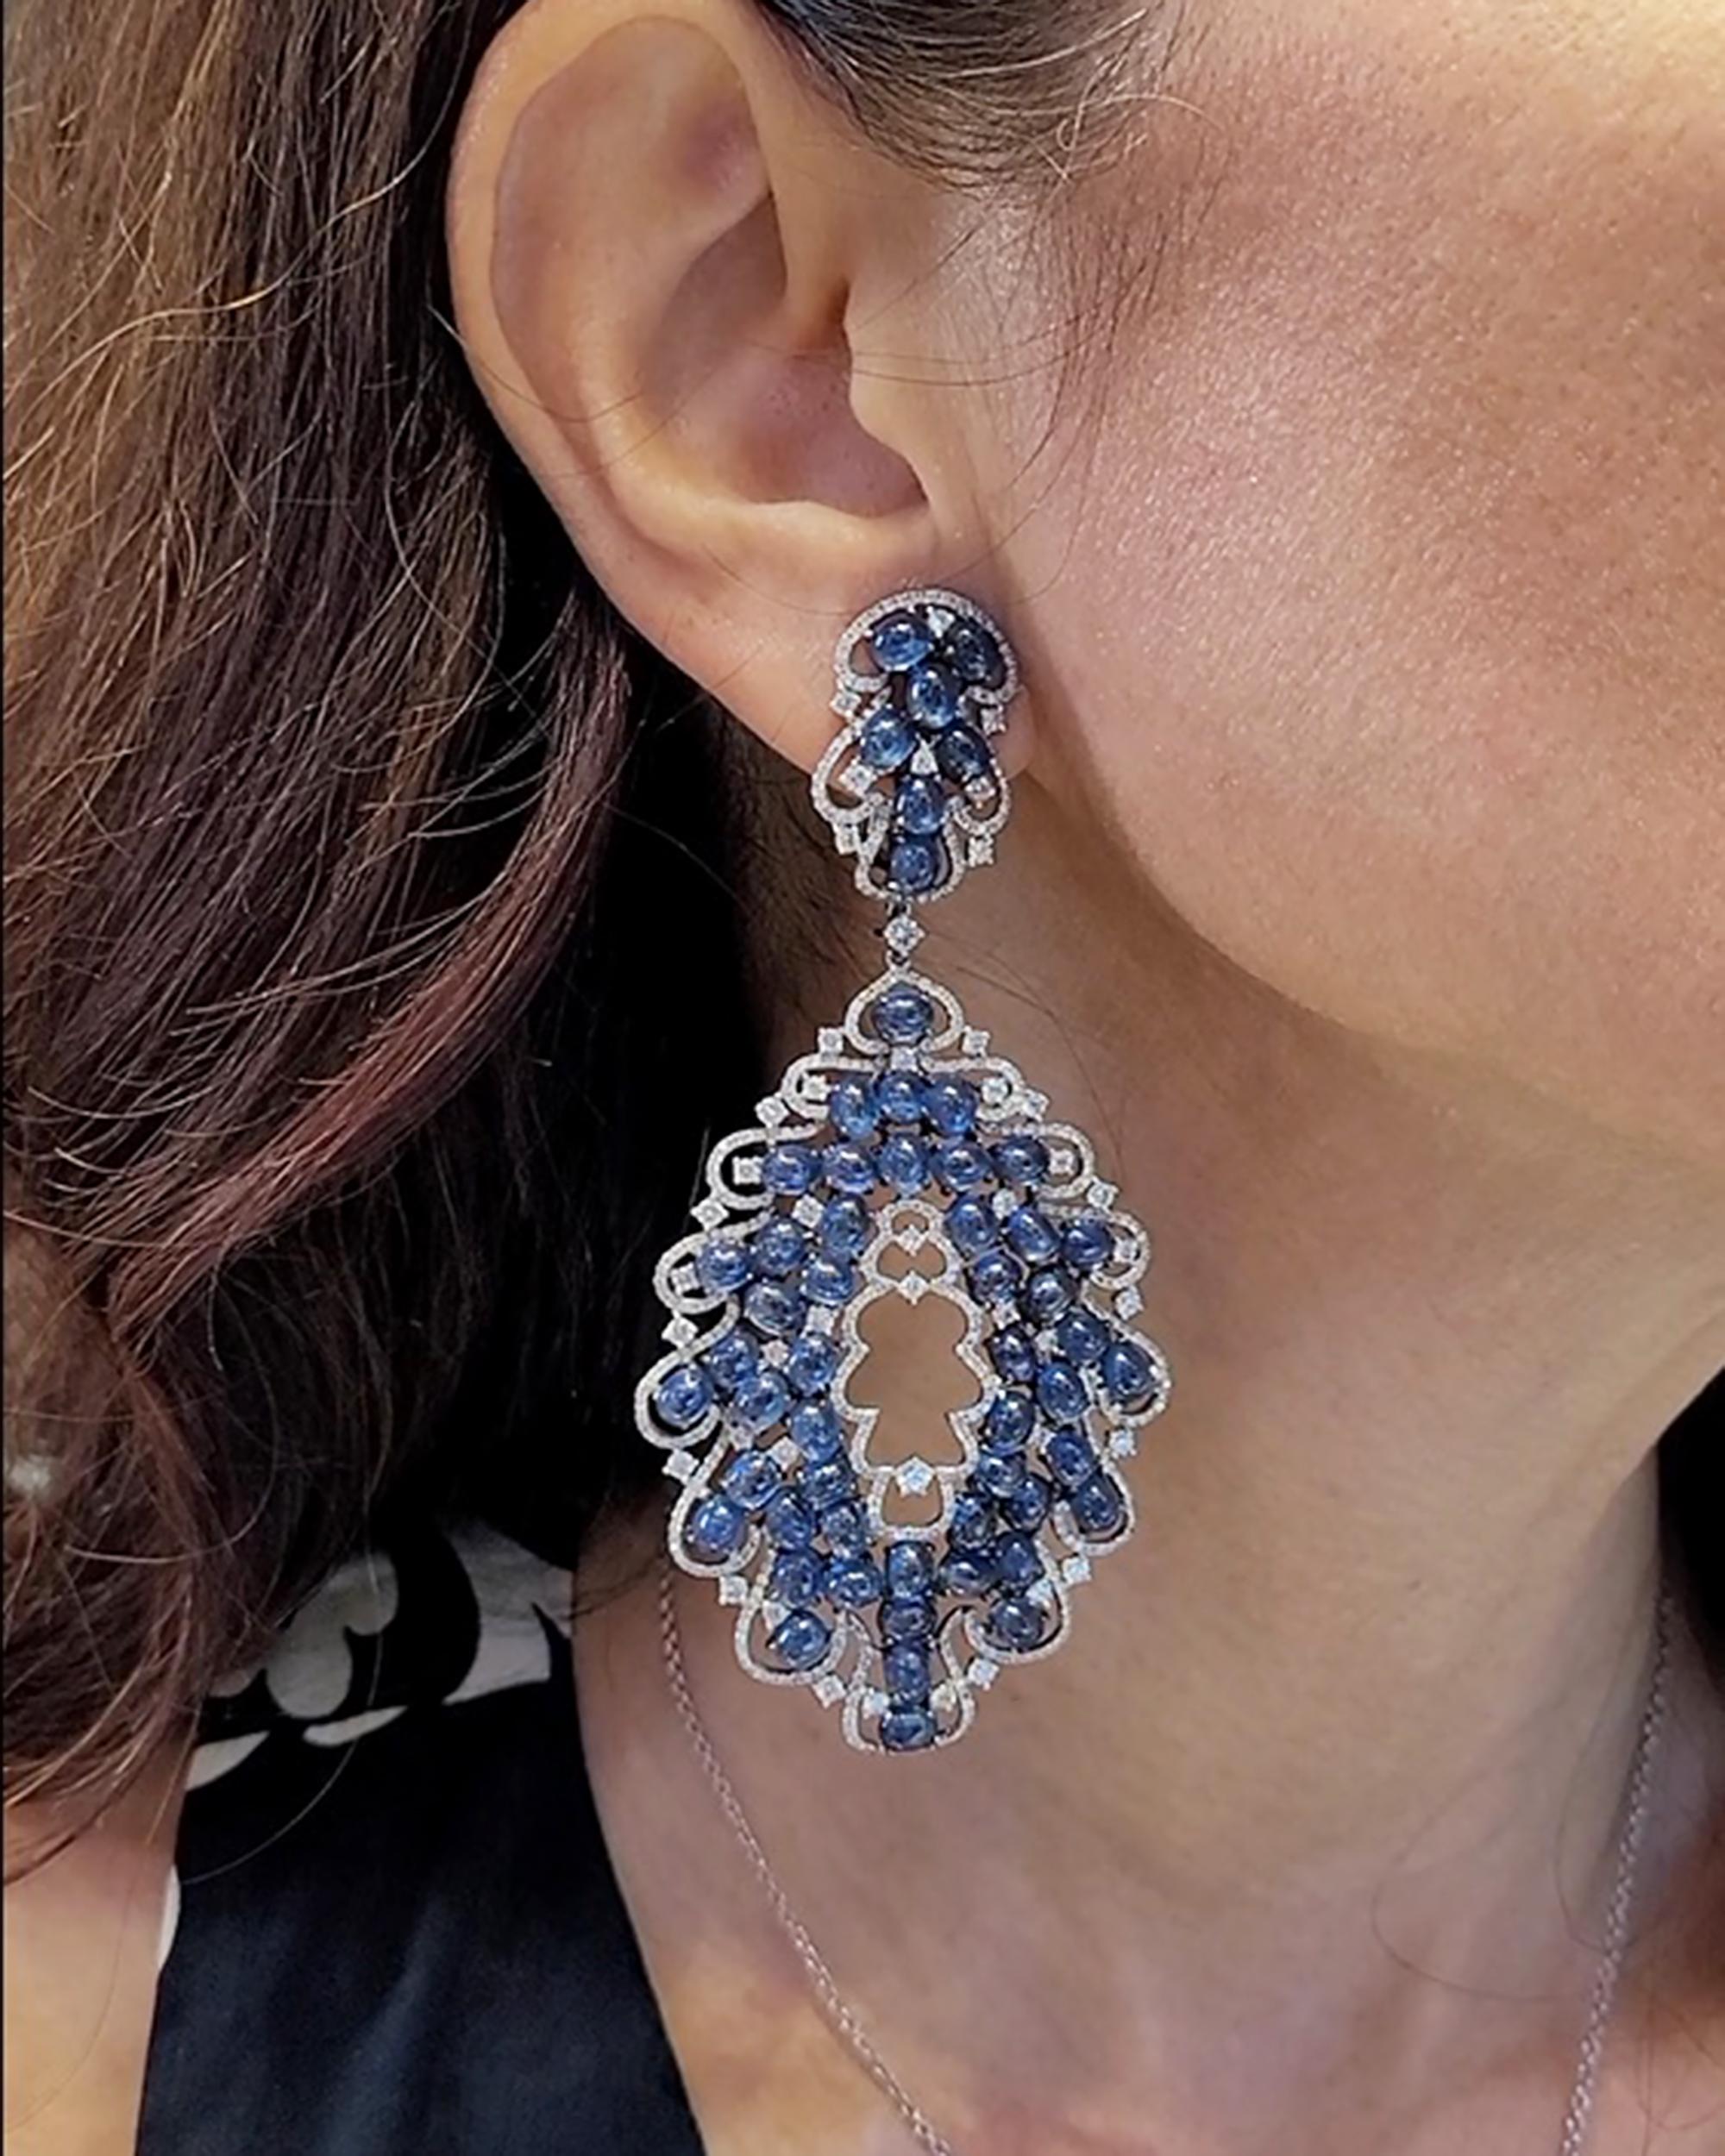 Introducing our dazzling celestial creations: Diamond Sapphire 18K White Gold Chandelier Earrings! These earrings aren't just accessories; they're wearable constellations that will make you the star of any event.
Picture this: 6.94 carats of round